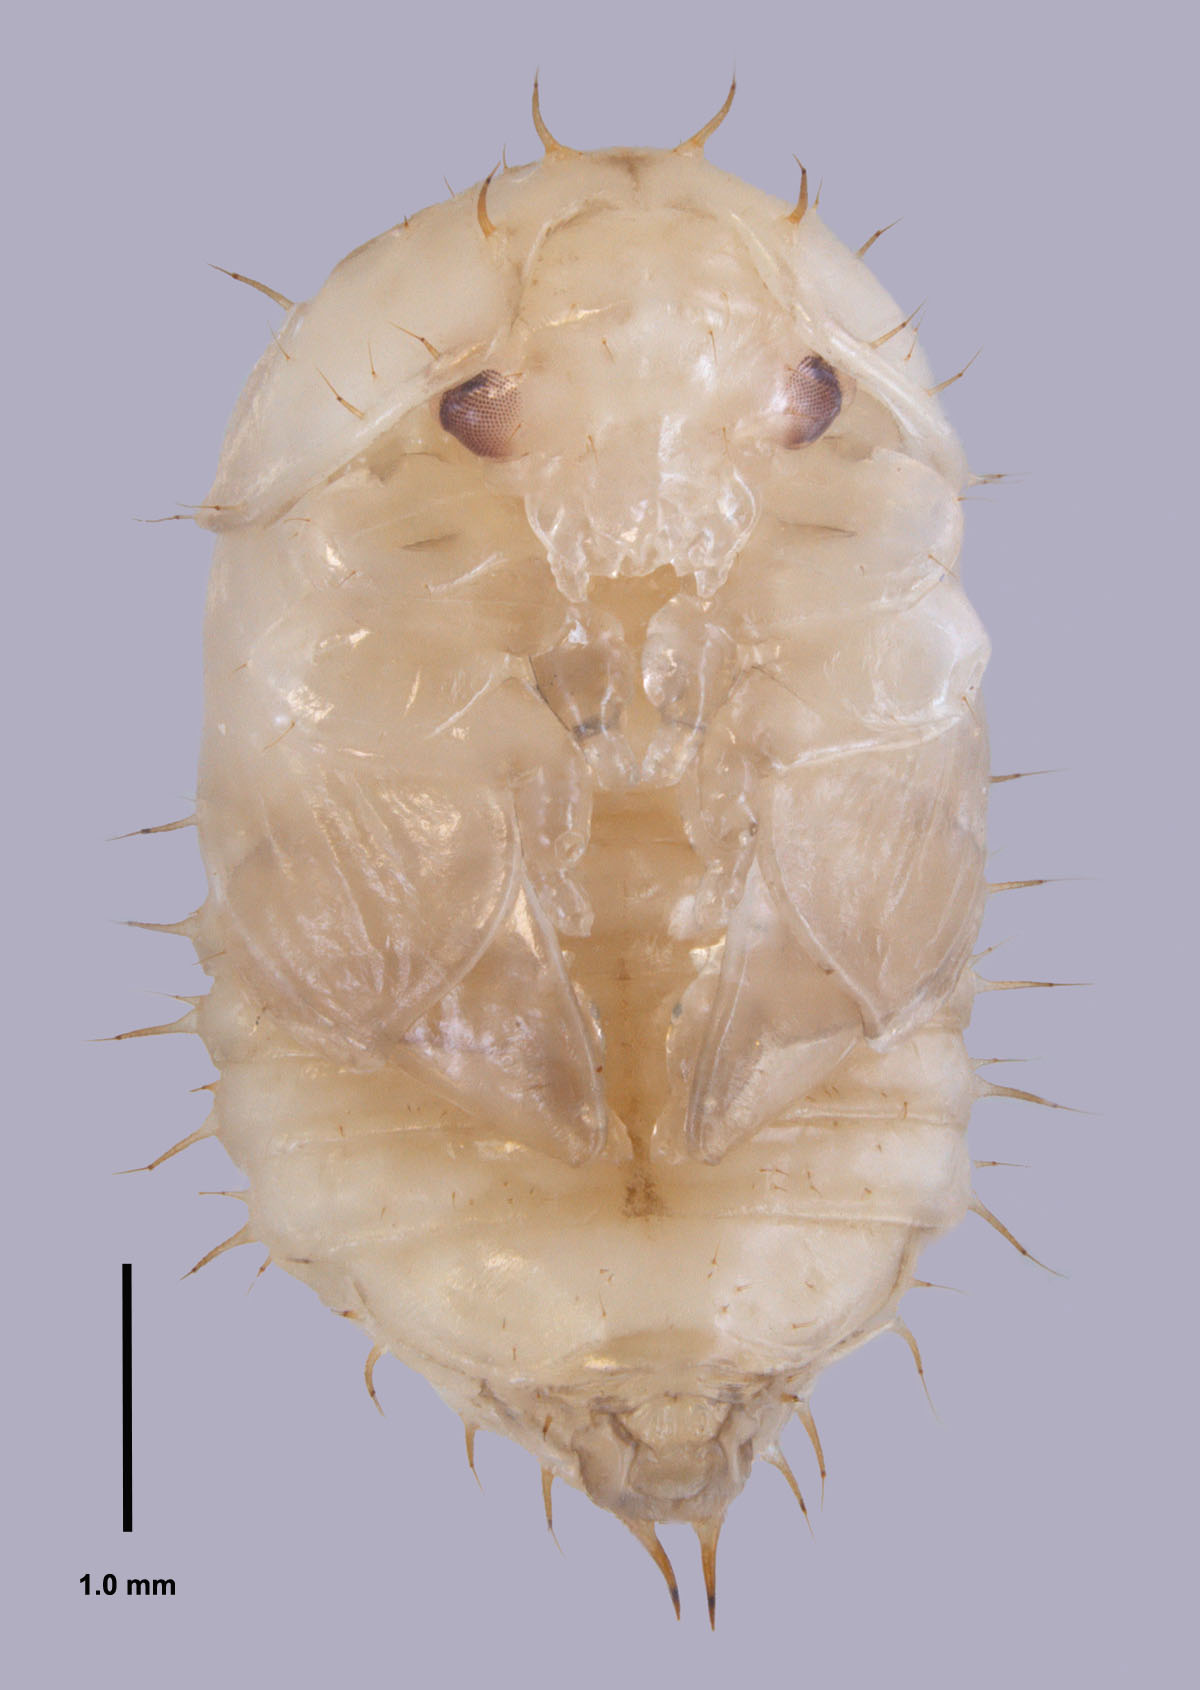 Aethina tumida Murray, ventral view of pupa by Joe MacGown